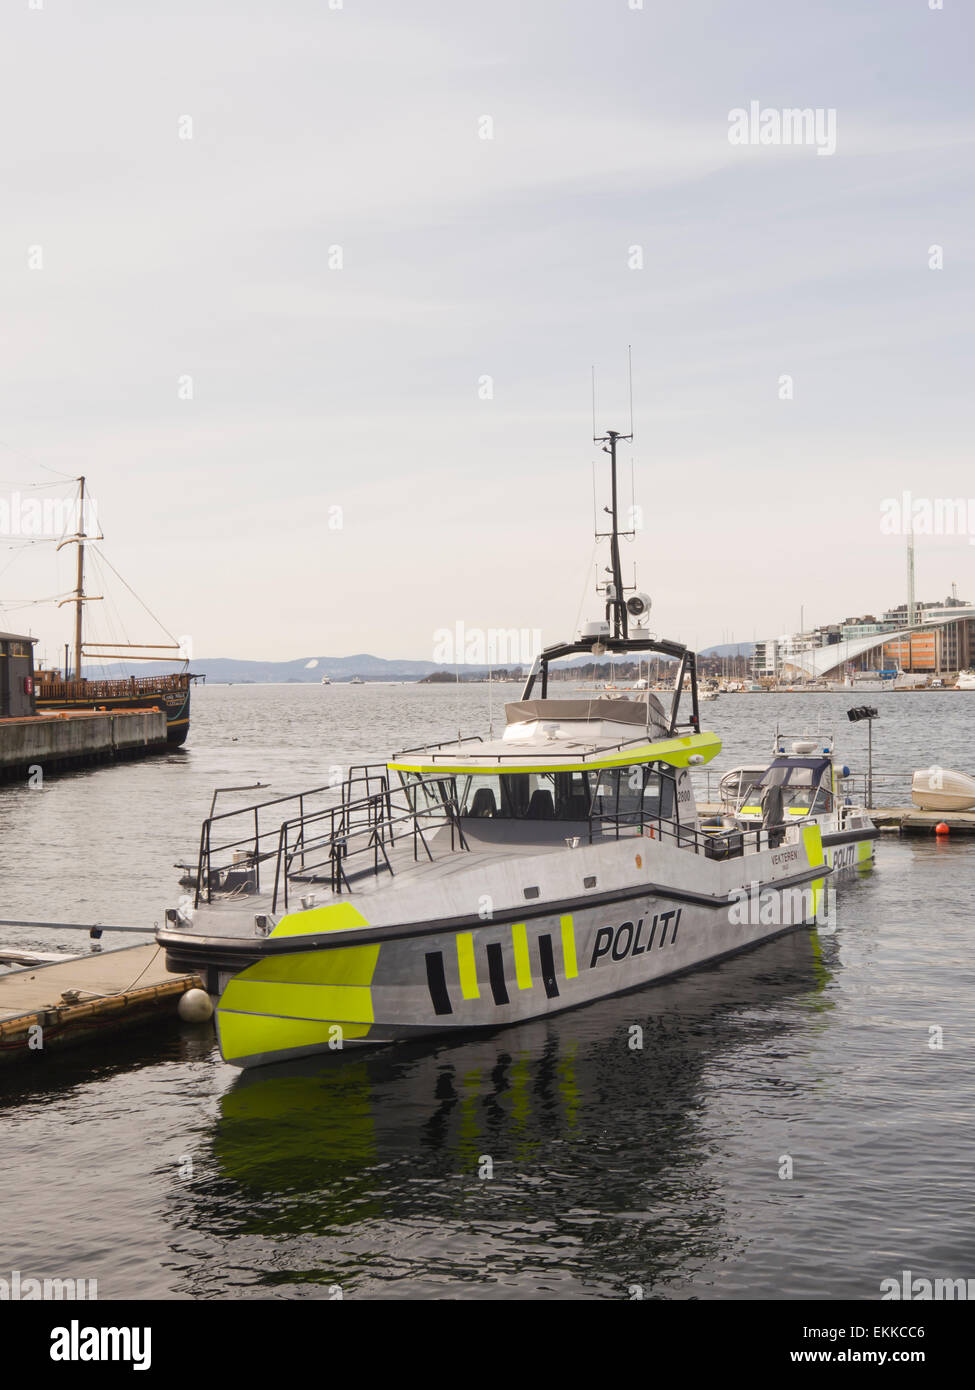 High-speed uniformed police boats in the harbour of Oslo Norway ready for a busy summer season on the fjord Stock Photo